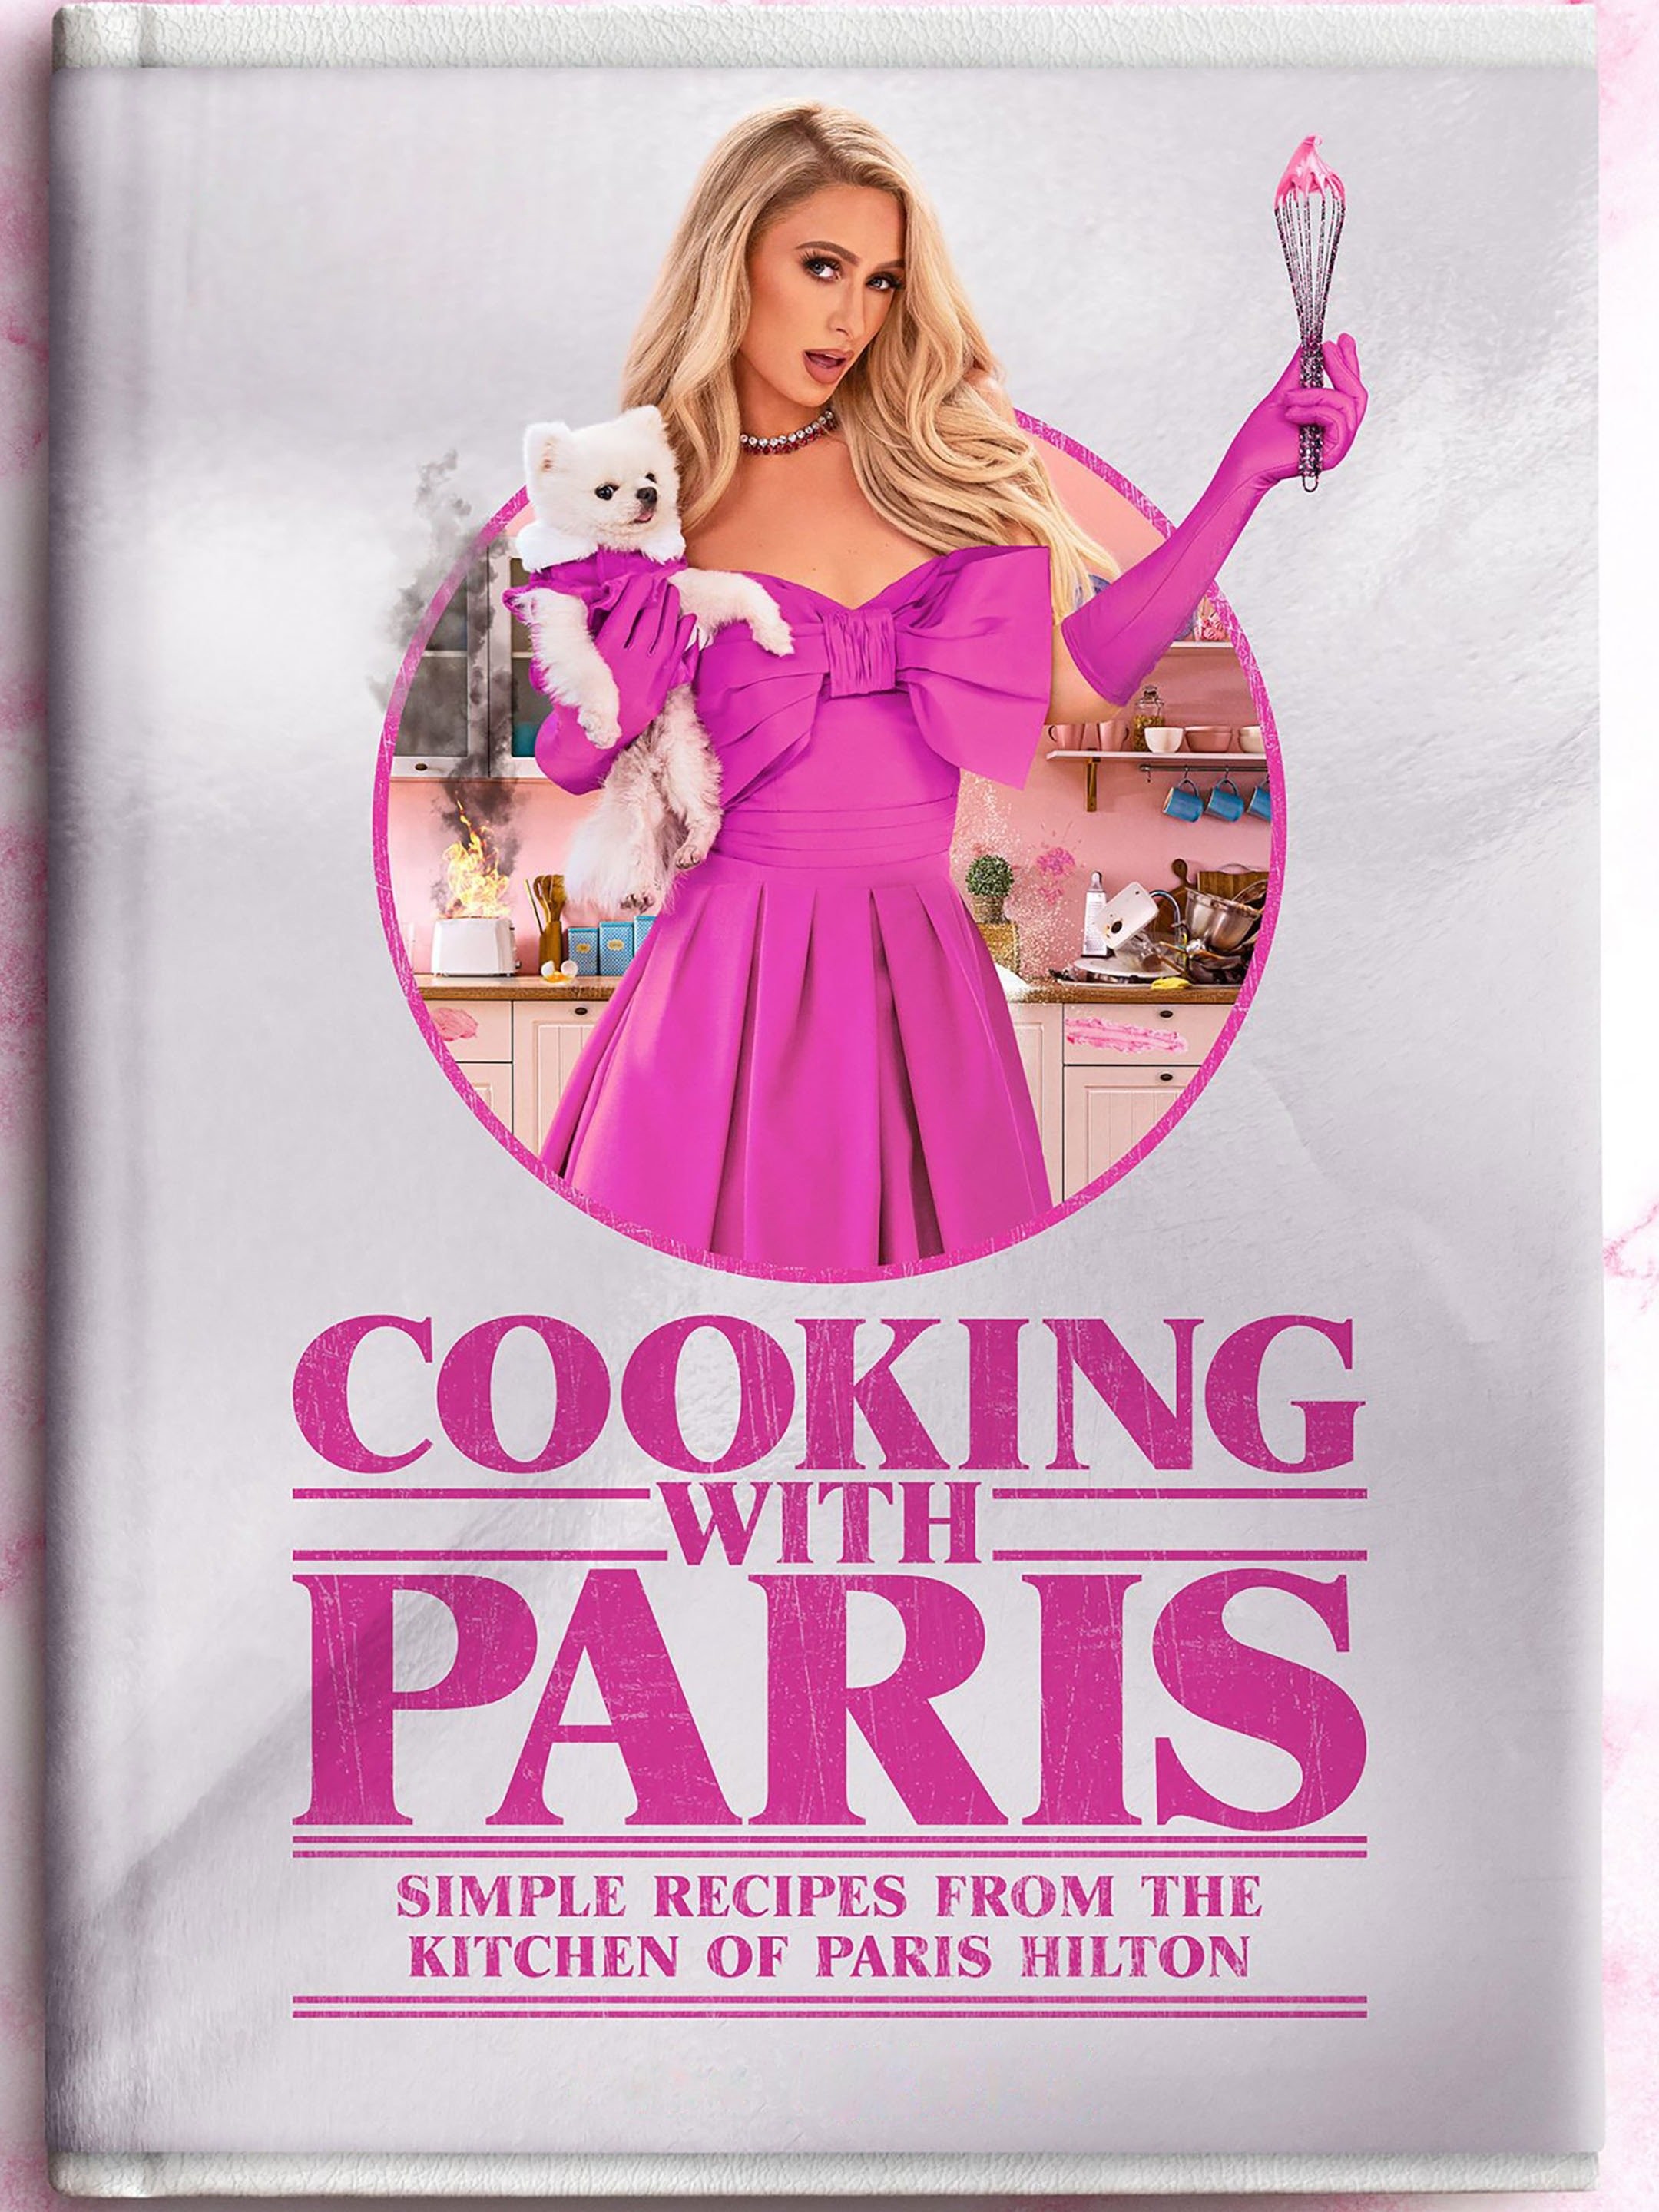 Paris Hilton on 'Cooking With Paris' and Building a Media Empire